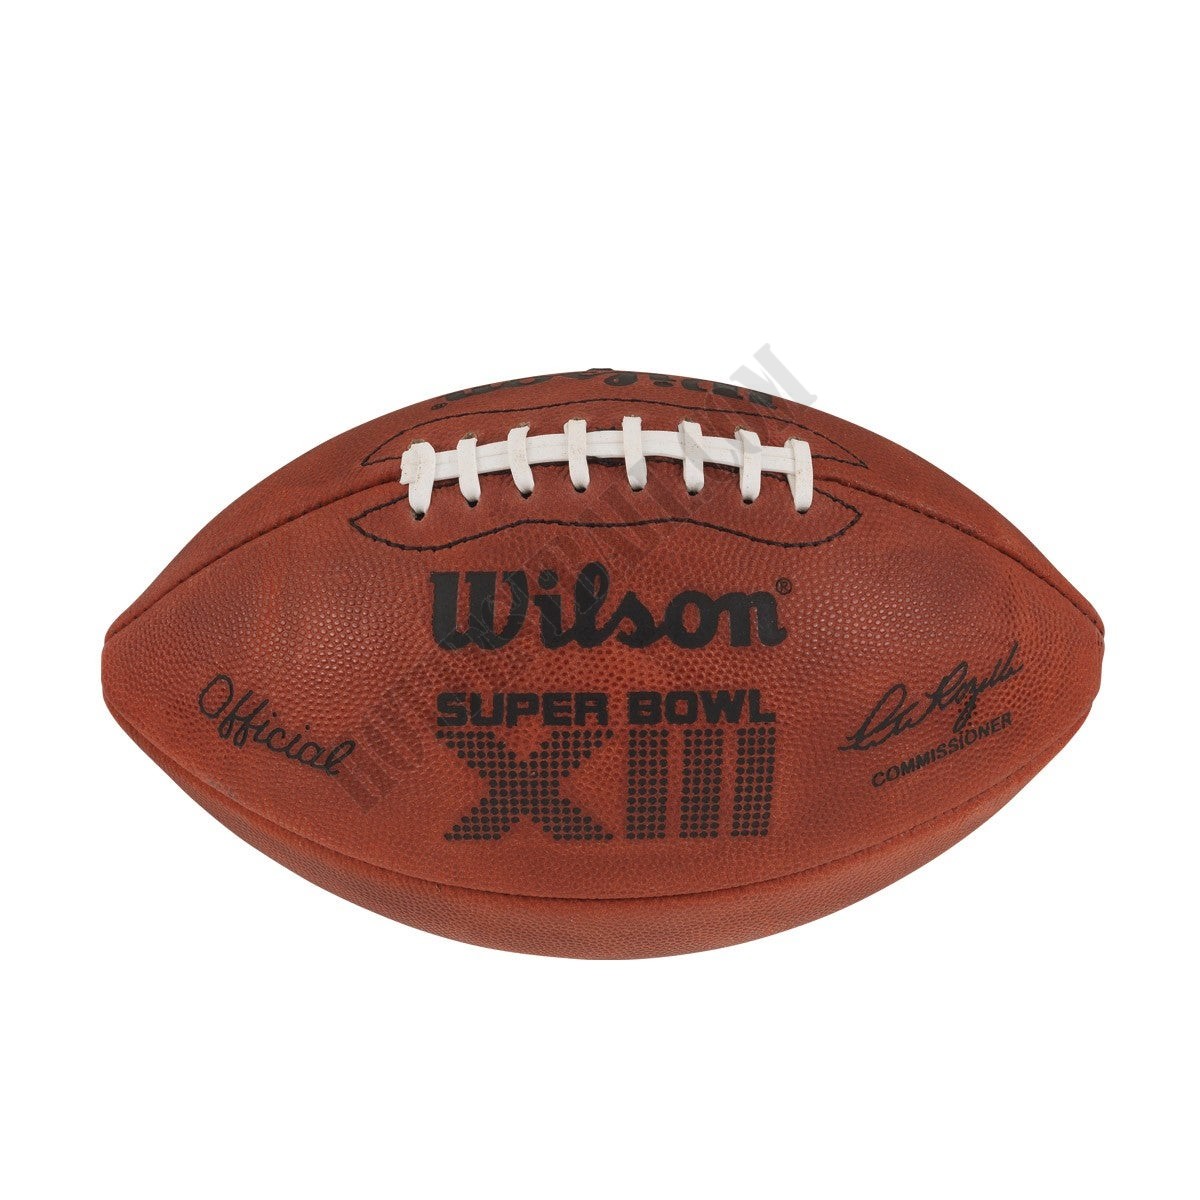 Super Bowl XIII Game Football - Pittsburgh Steelers ● Wilson Promotions - Super Bowl XIII Game Football - Pittsburgh Steelers ● Wilson Promotions